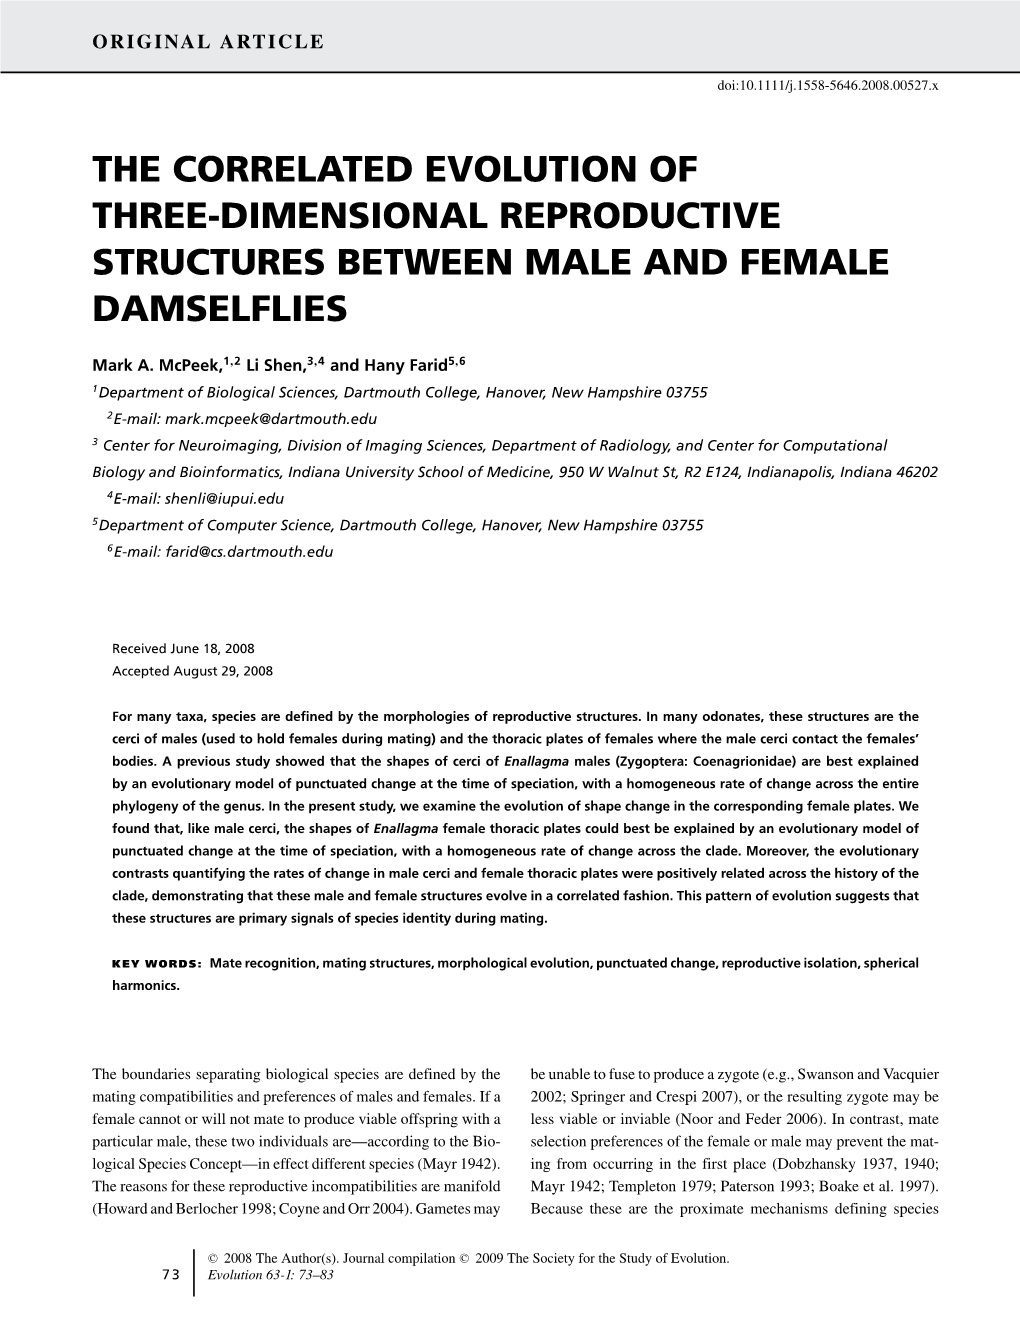 The Correlated Evolution of Three-Dimensional Reproductive Structures Between Male and Female Damselflies